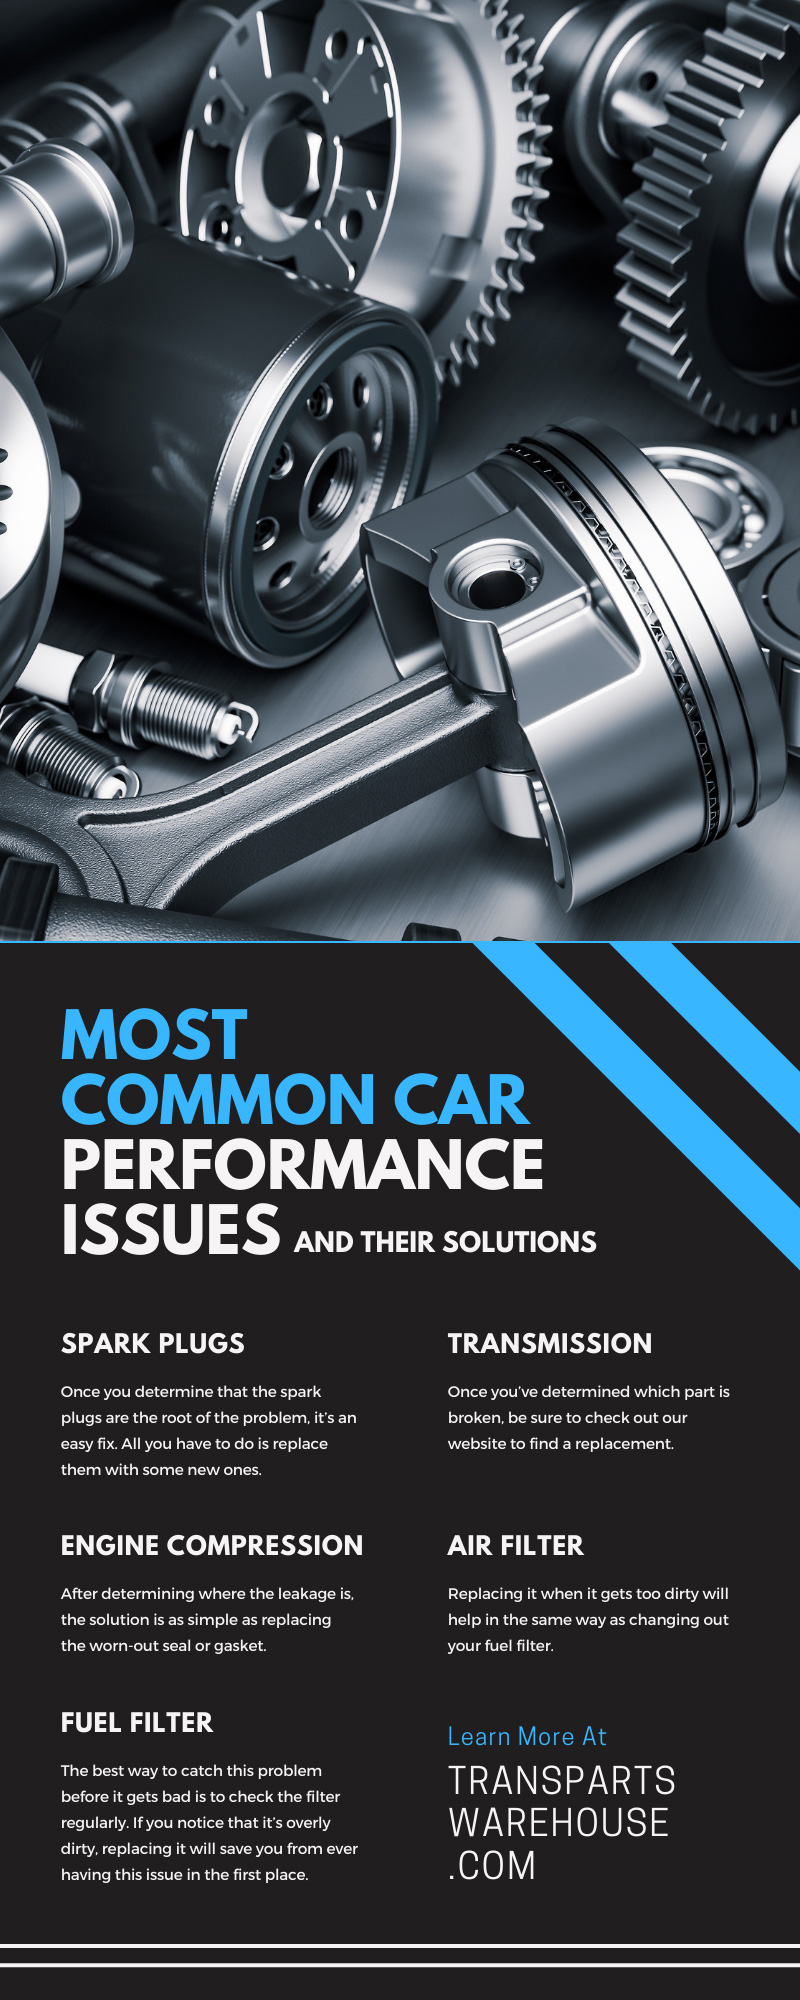 Most Common Car Performance Issues and Their Solutions